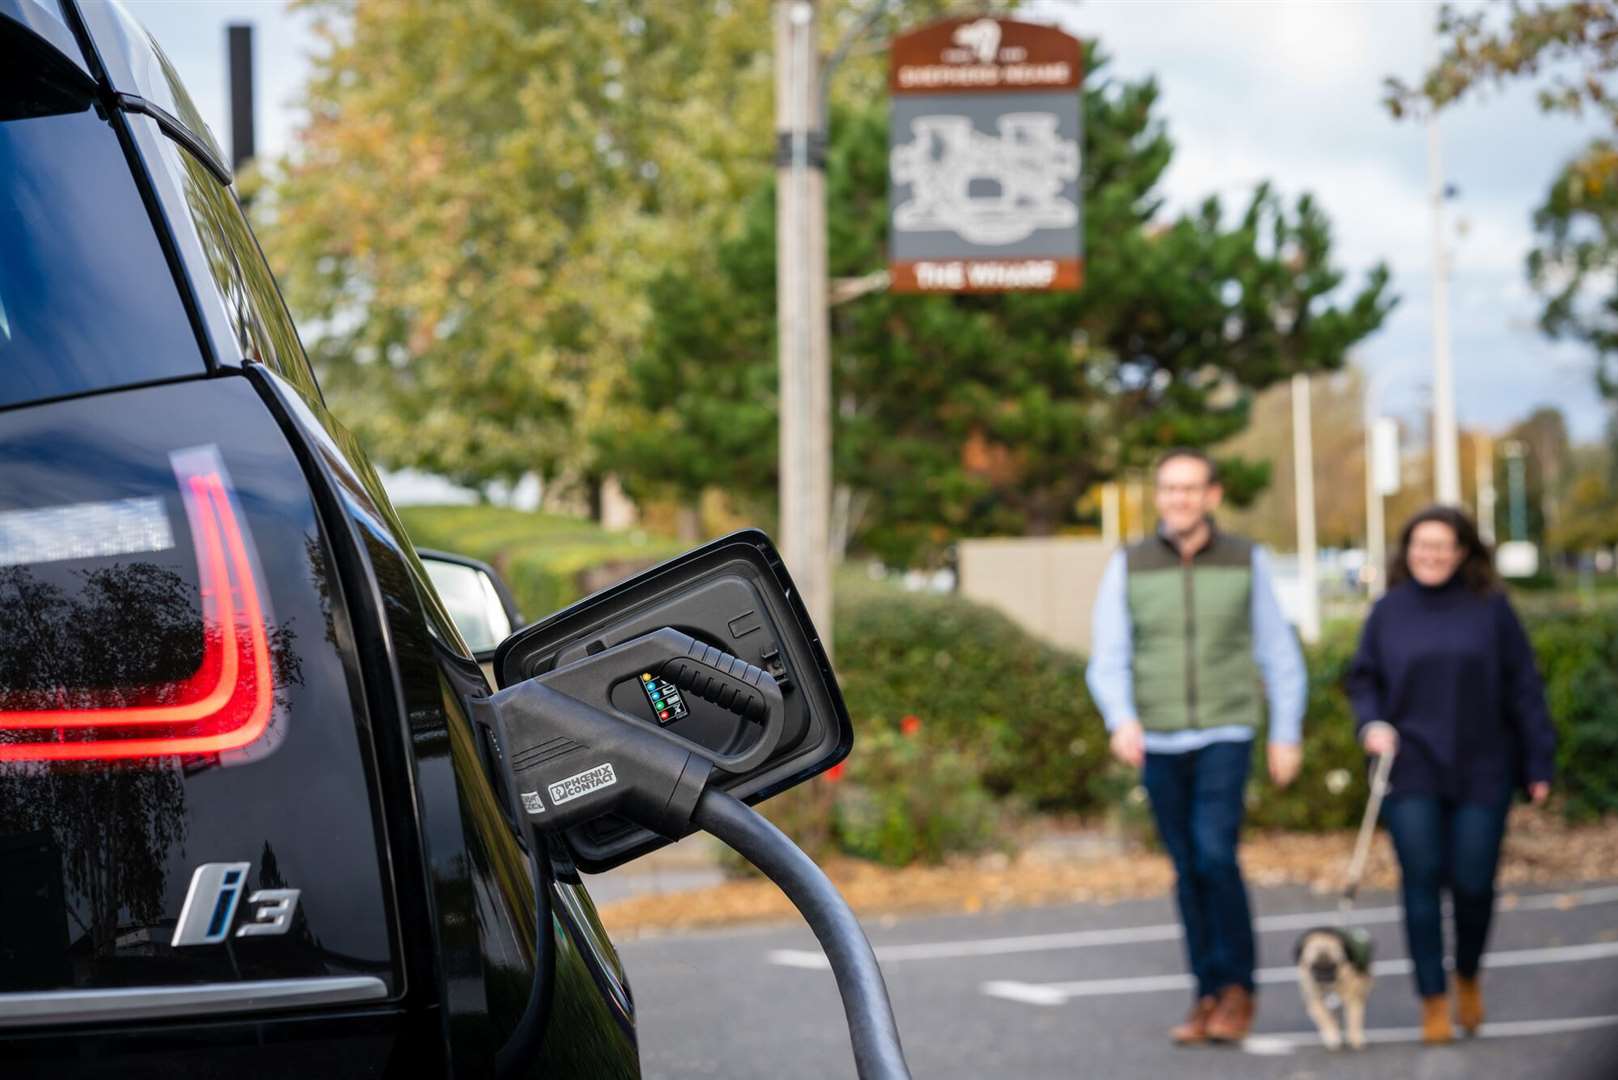 Shepherd Neame says more charging points will follow soon, Picture: Frankie Julian